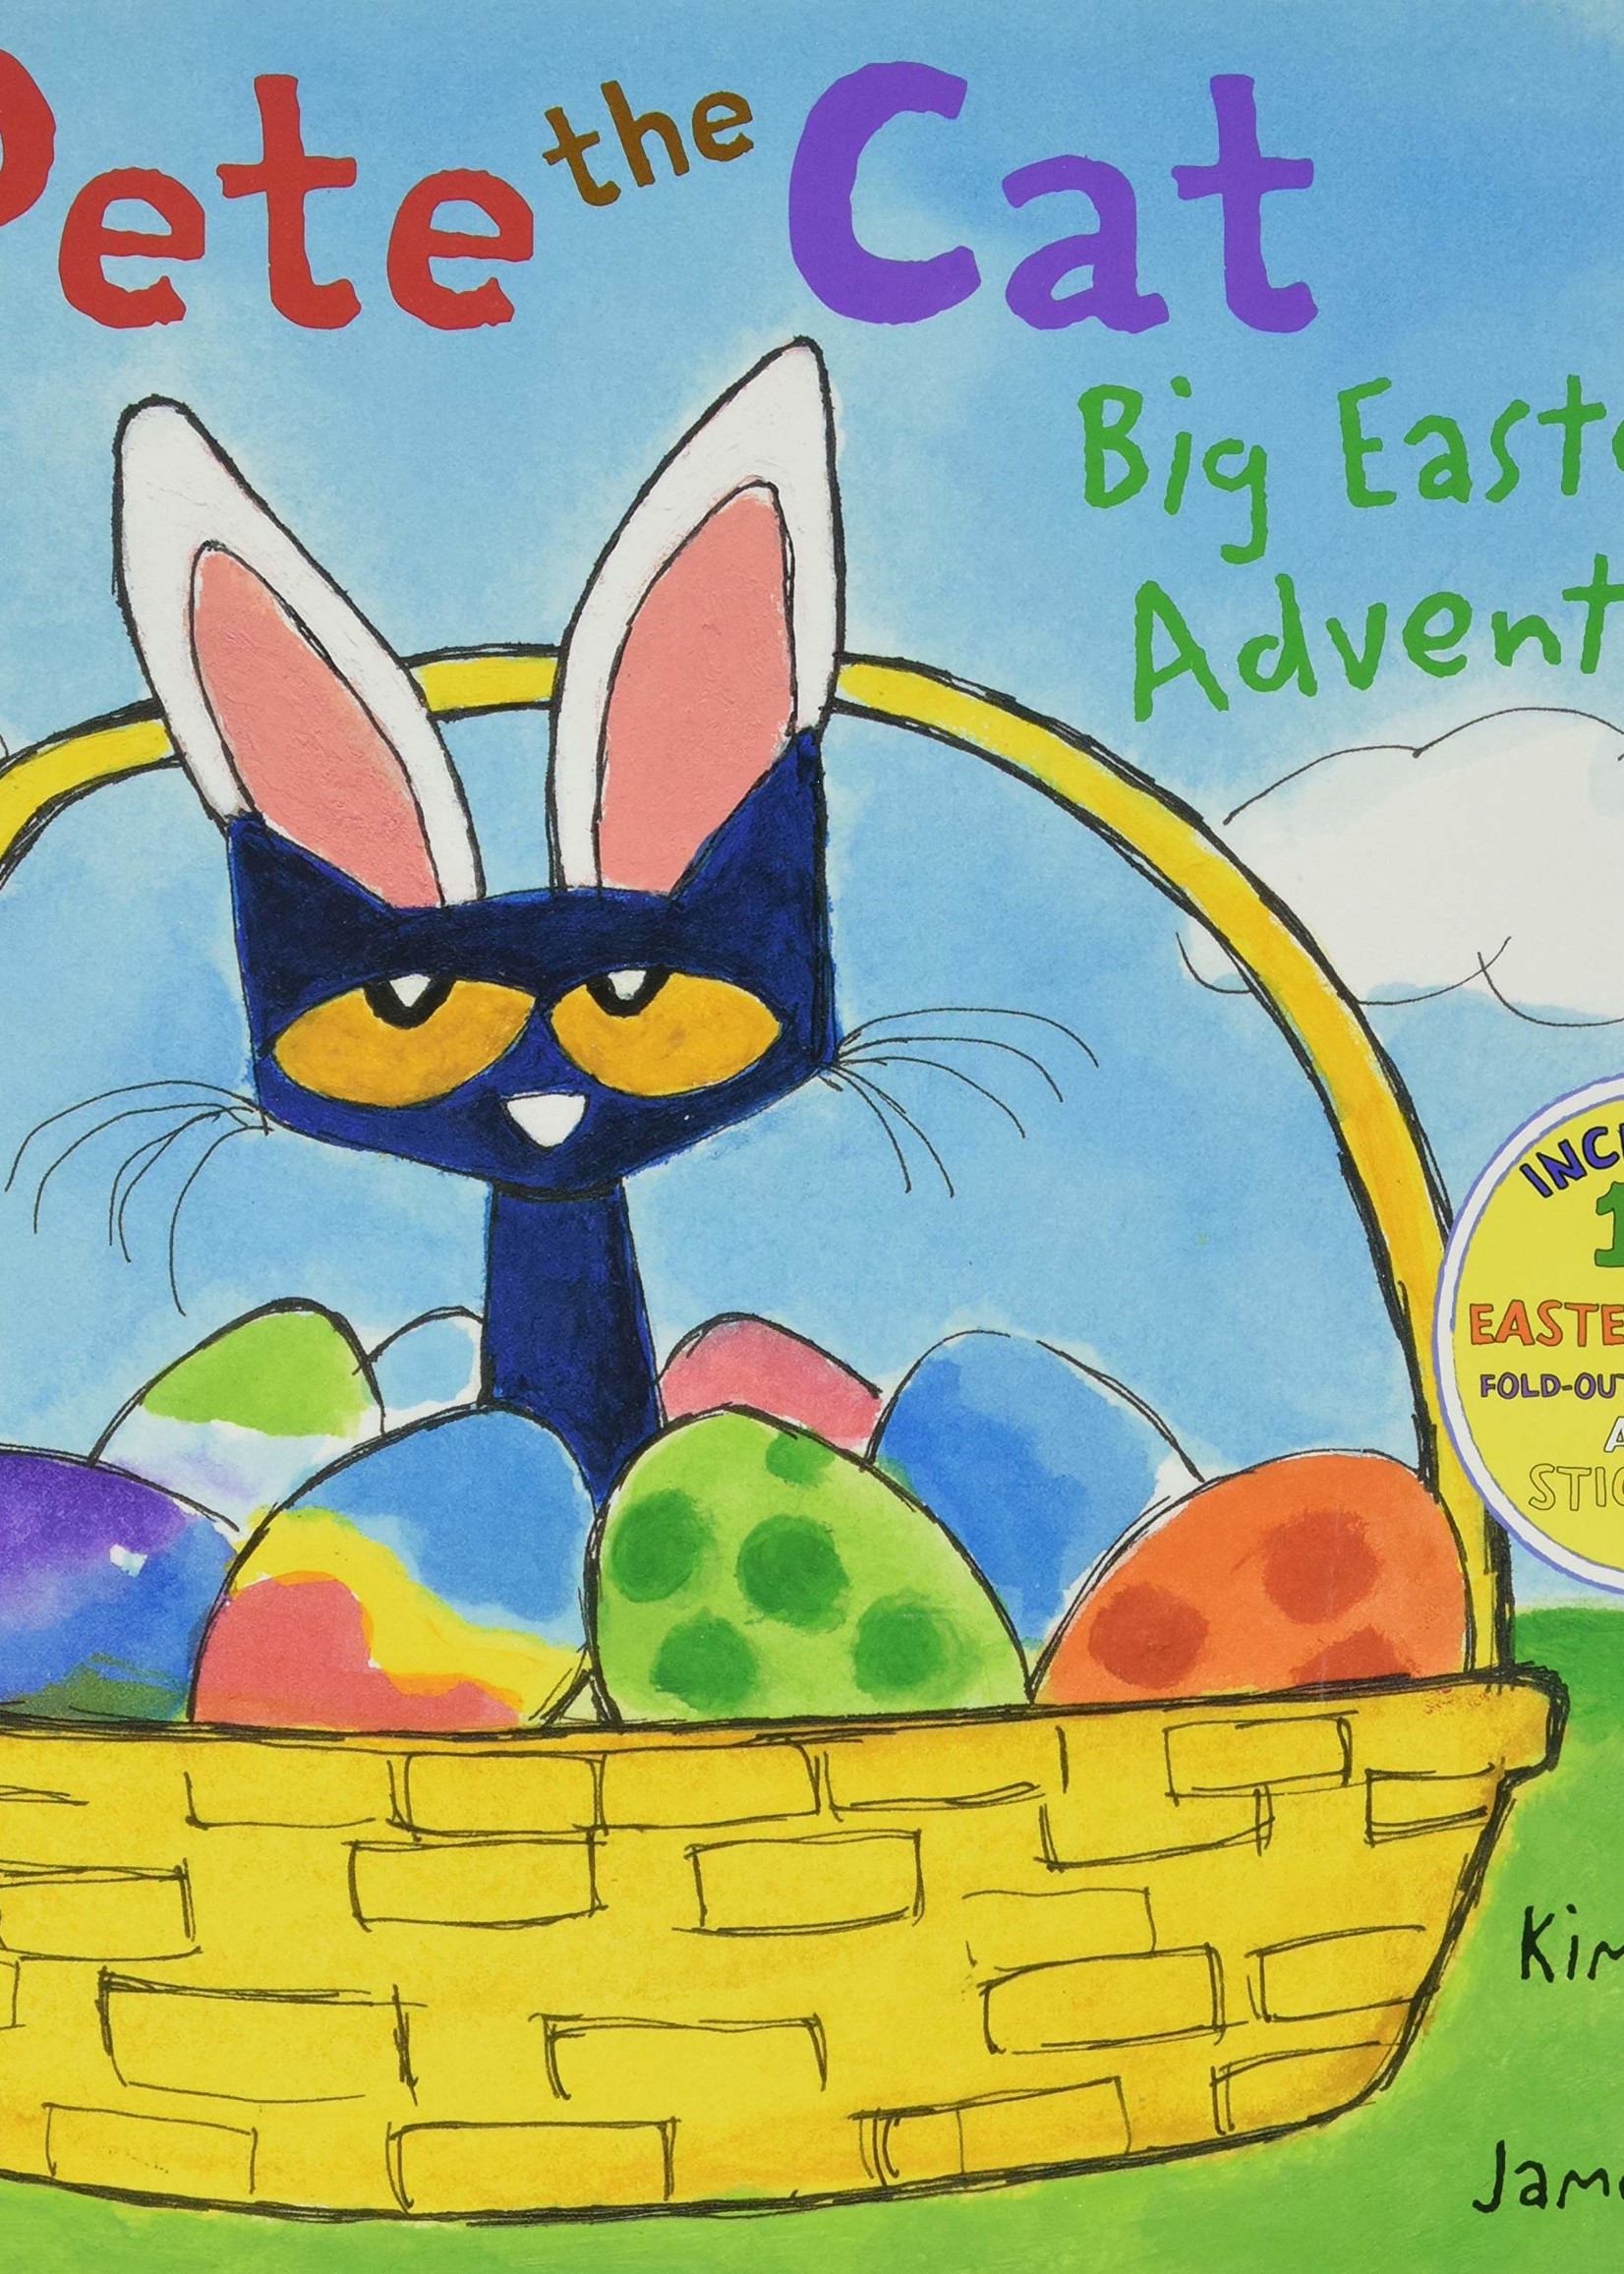 Pete the Cat, Big Easter Adventure - Hardcover